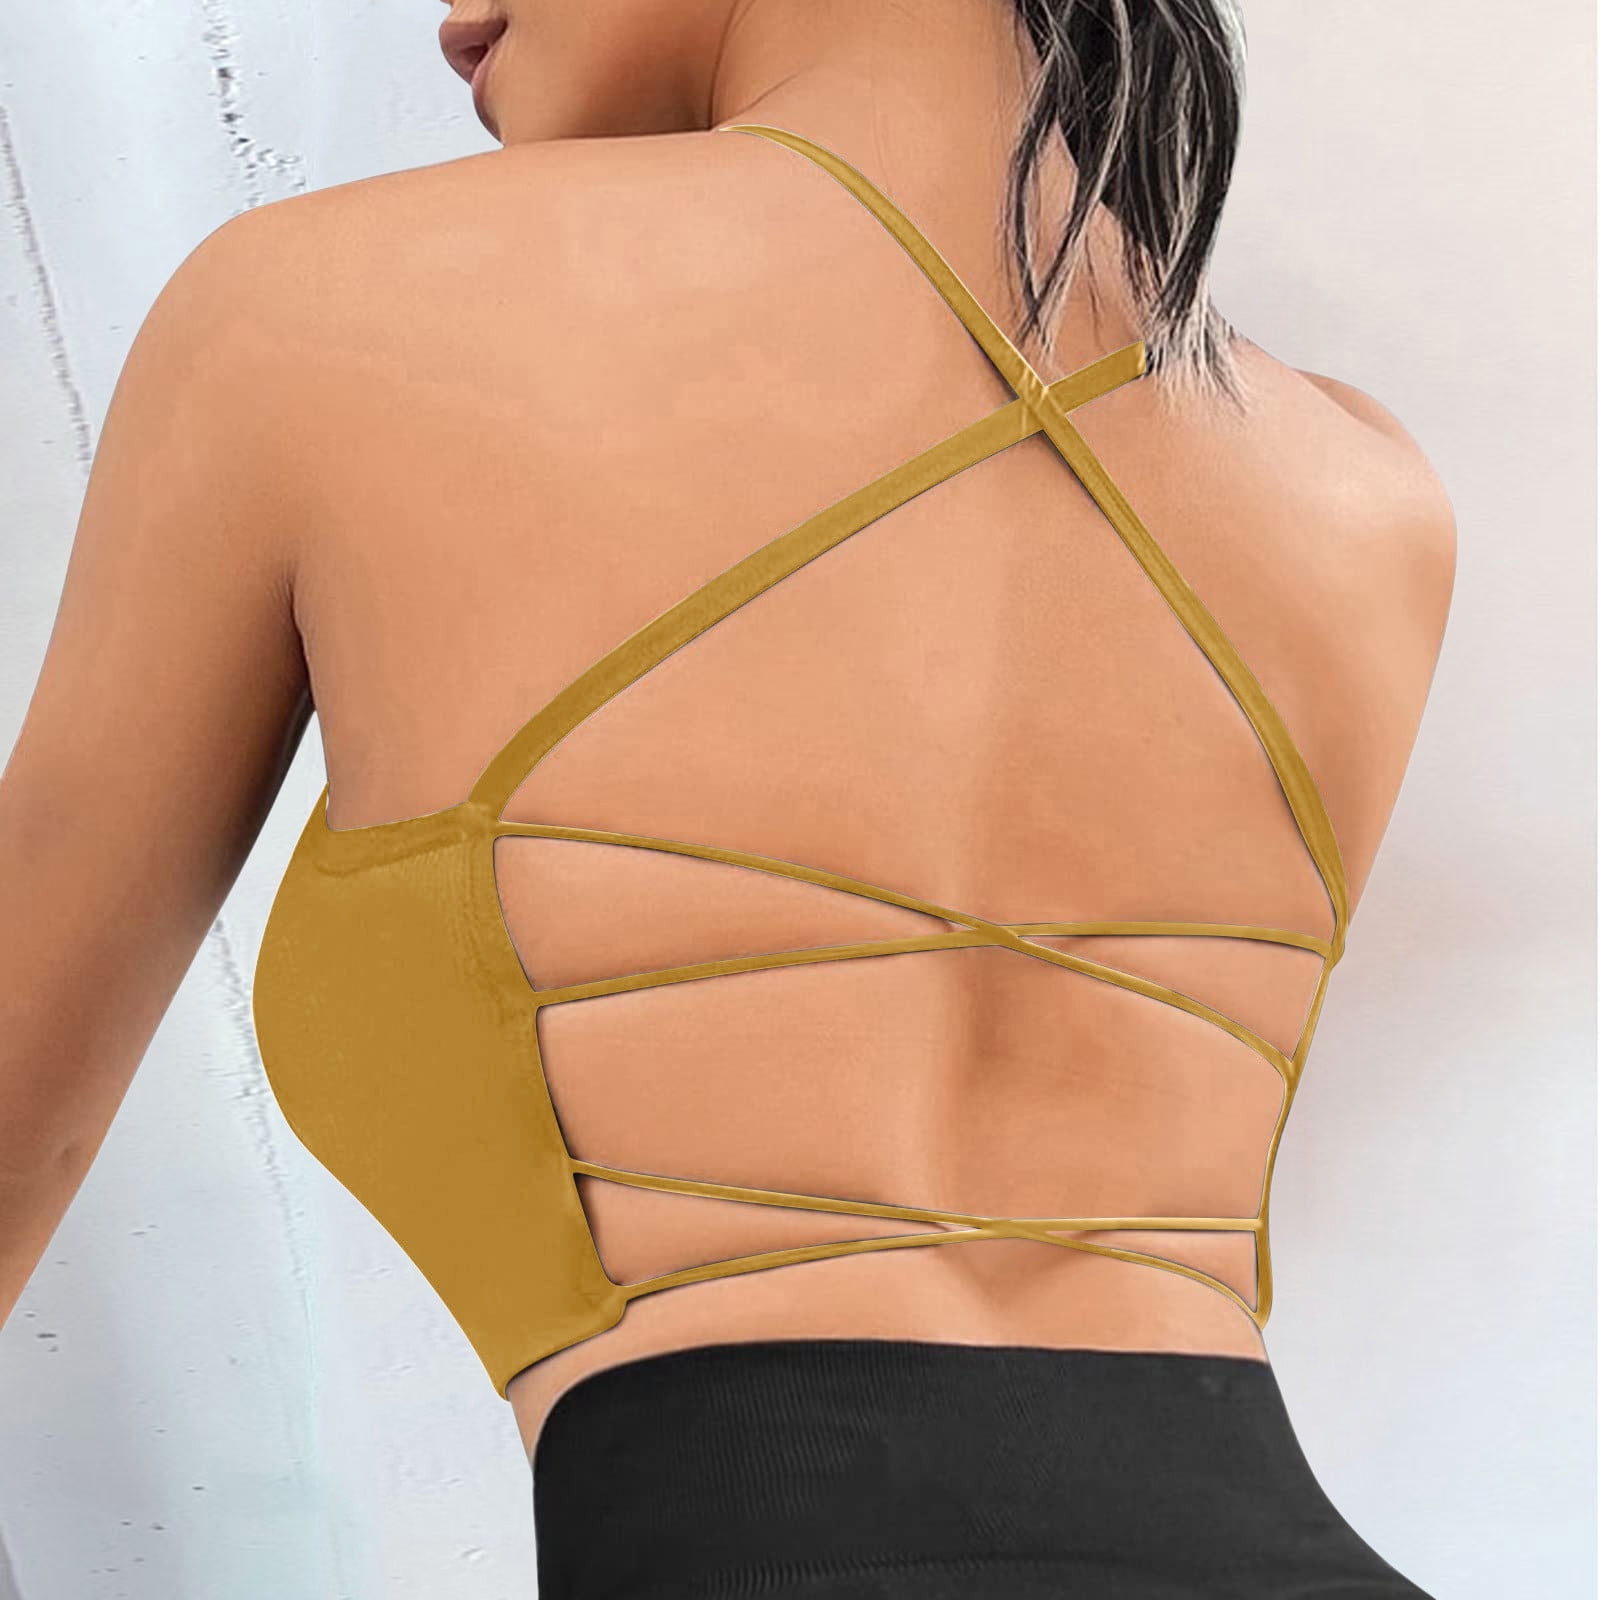 Halter Dress Supportive Sports Bra Yellow Yoga Pants Strapless Bra Pasties  Caged Neckline Double Bra Tape Womens Worko at  Women's Clothing store